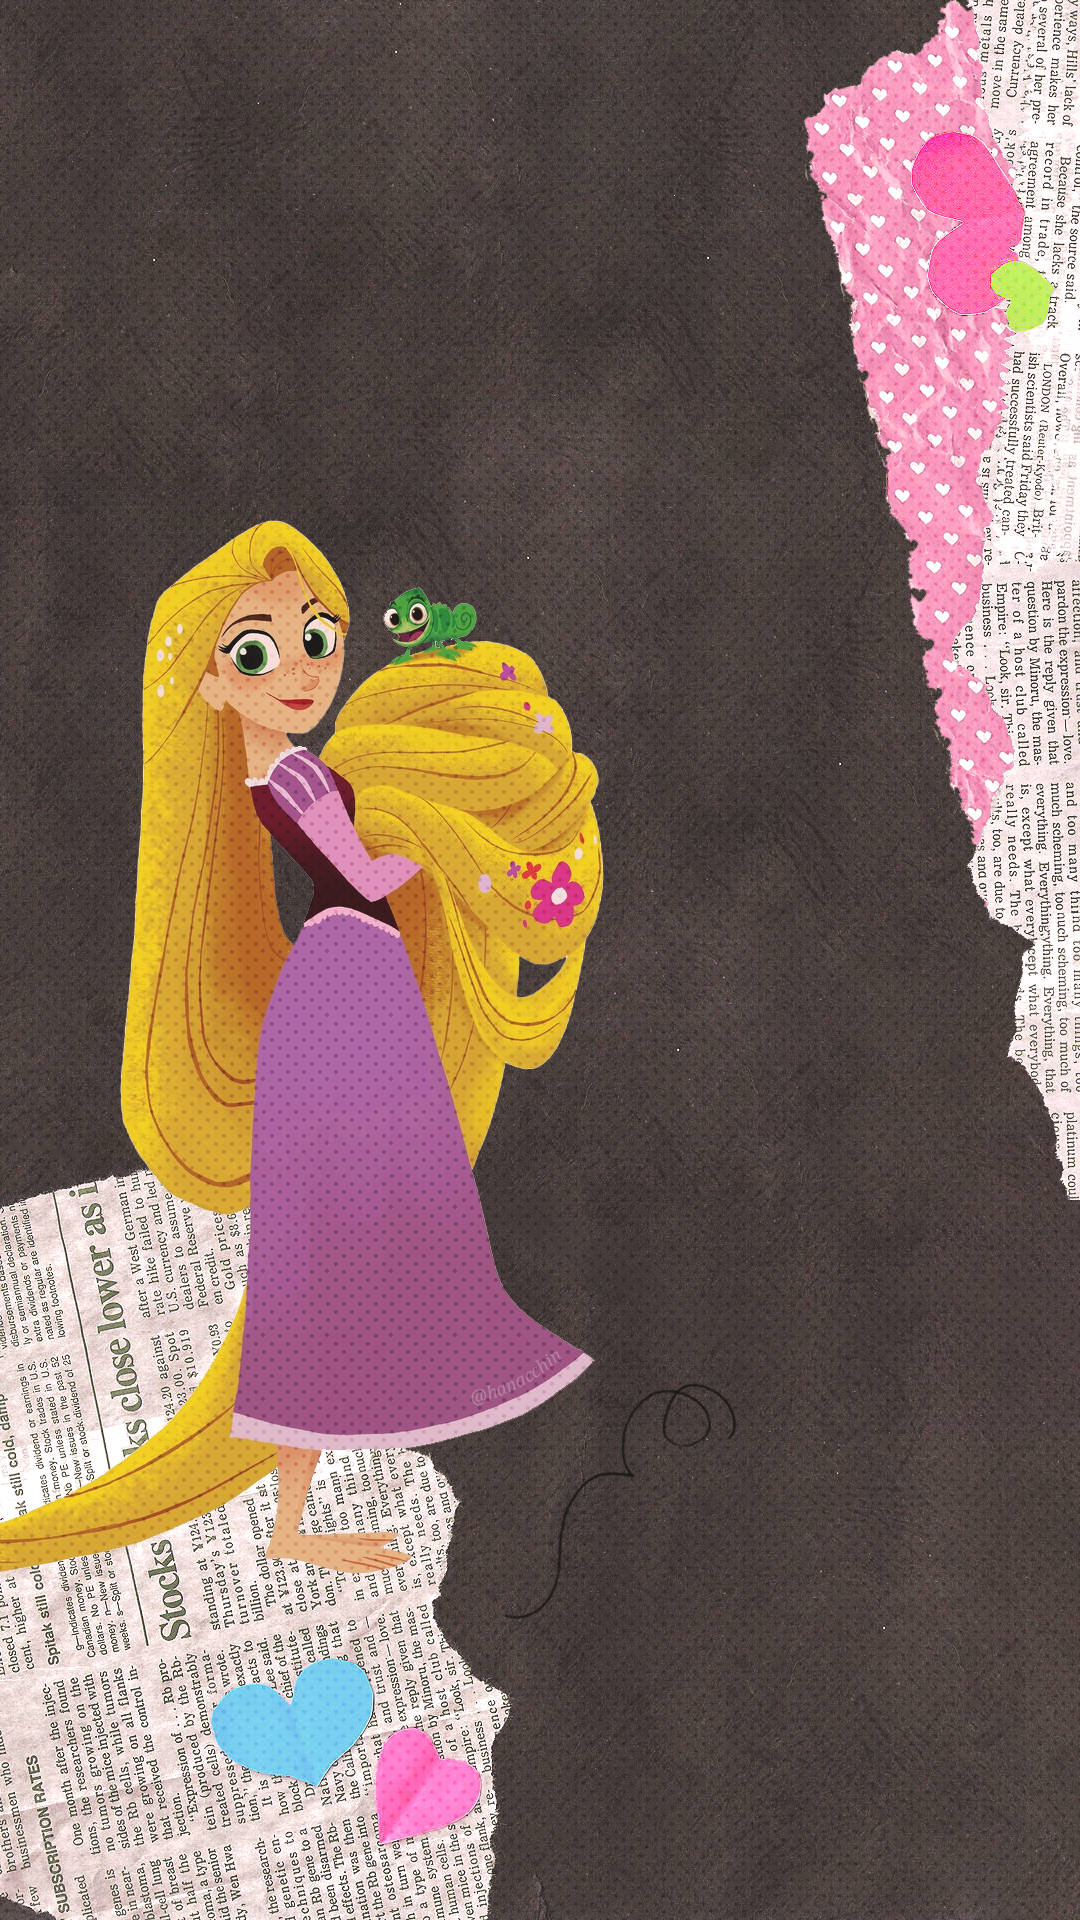 A Whimsical Scene From Disney's Rapunzel Background